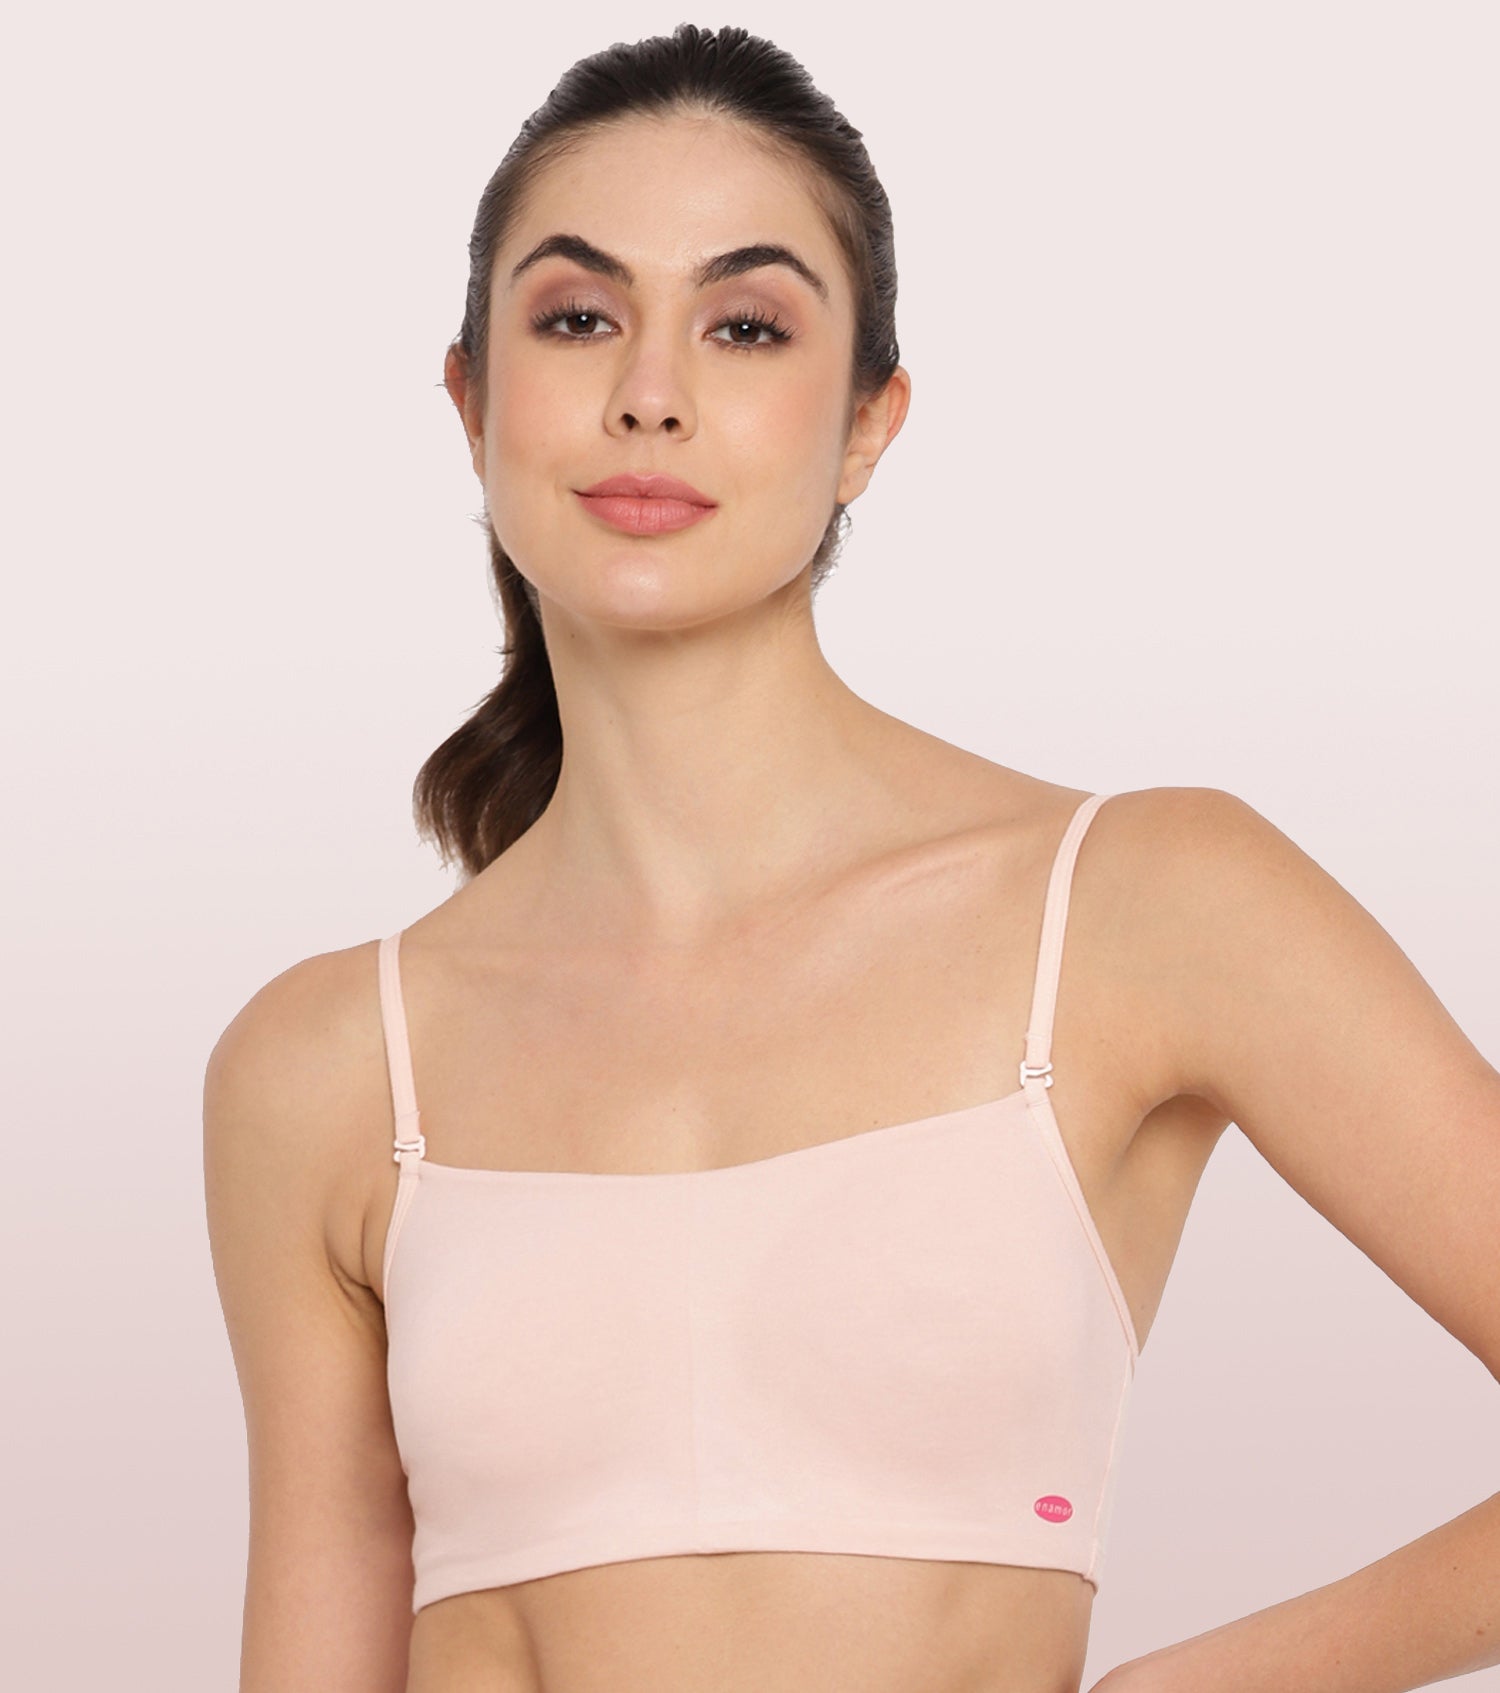 Enamor A055 Stretch Cotton Comfort Shaper With Detachable Straps T-Shirt  Bra Non-Padded Wirefree High Coverage in Vijayawada at best price by Sai  Comforts Readymade Garments - Justdial